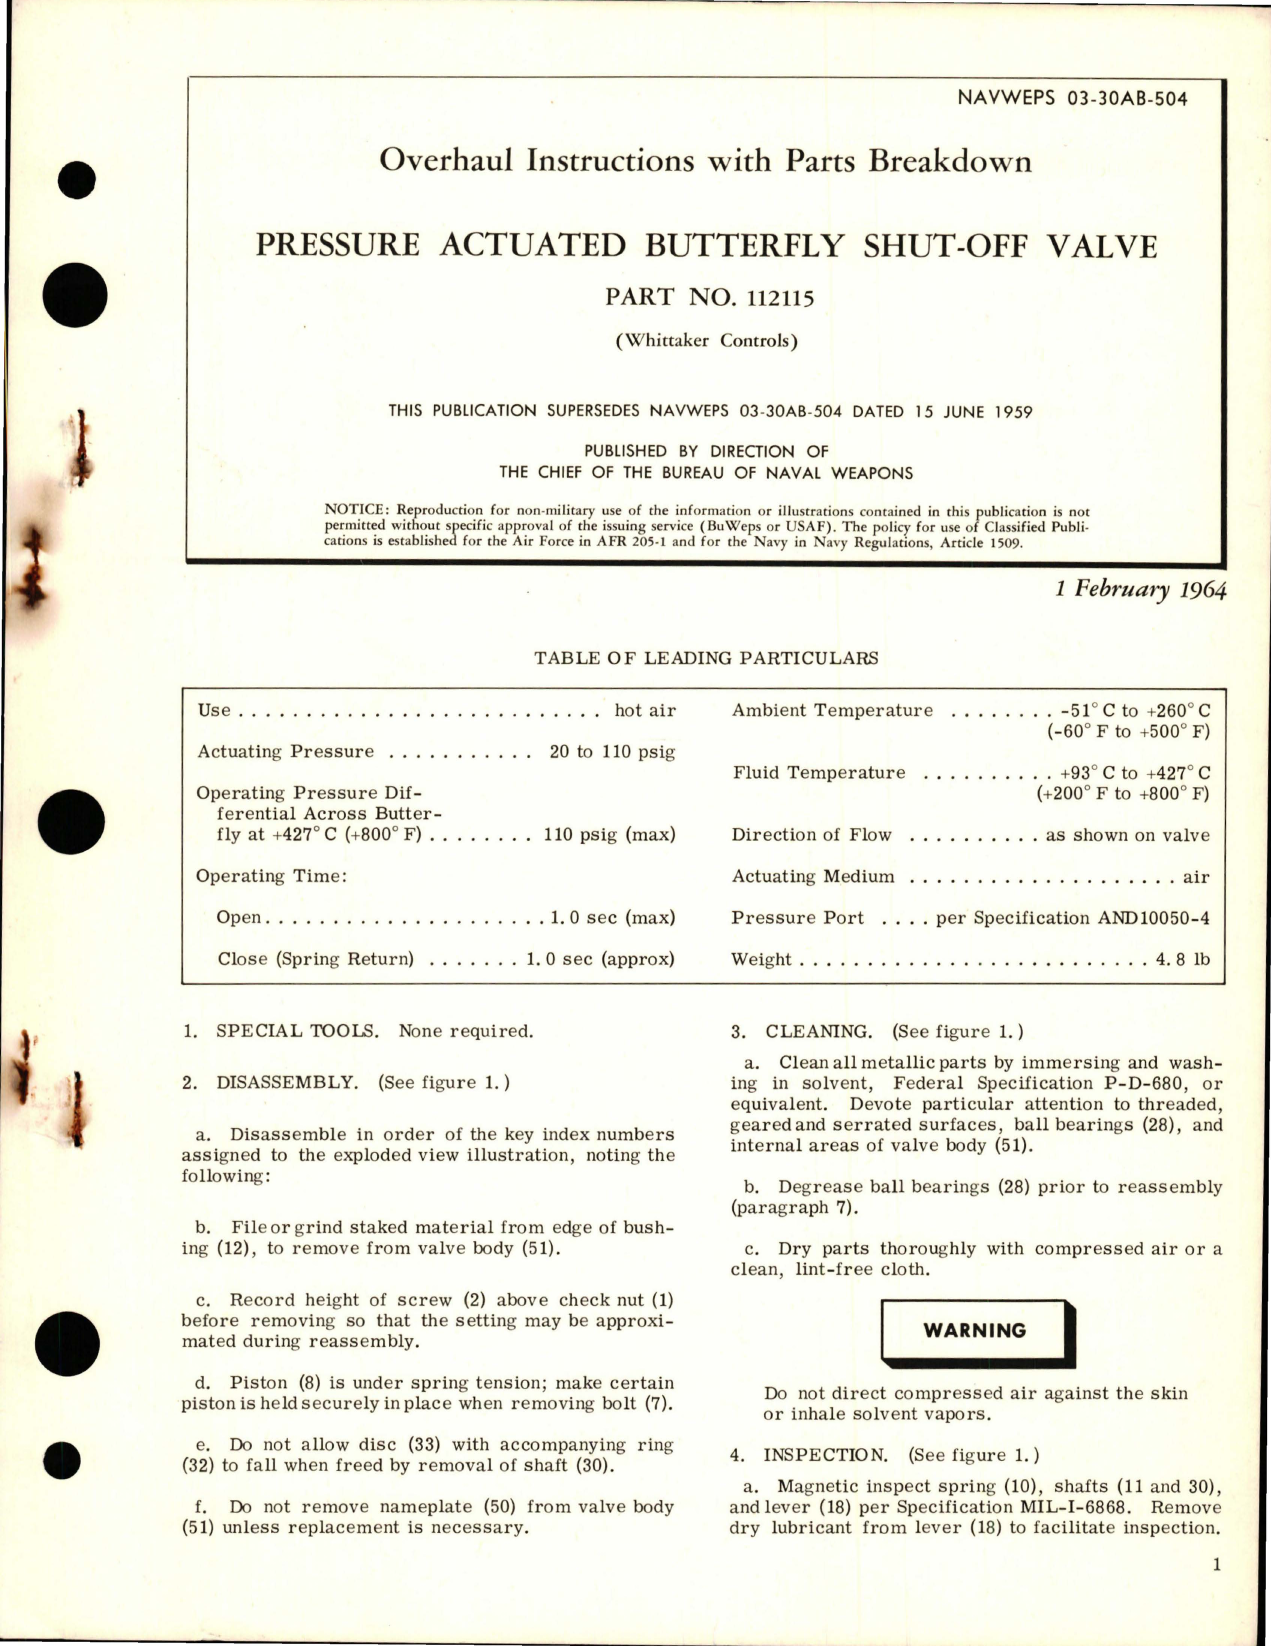 Sample page 1 from AirCorps Library document: Overhaul Instructions with Parts Breakdown for Pressure Actuated Butterfly Shut-Off Valve - Part 112115 